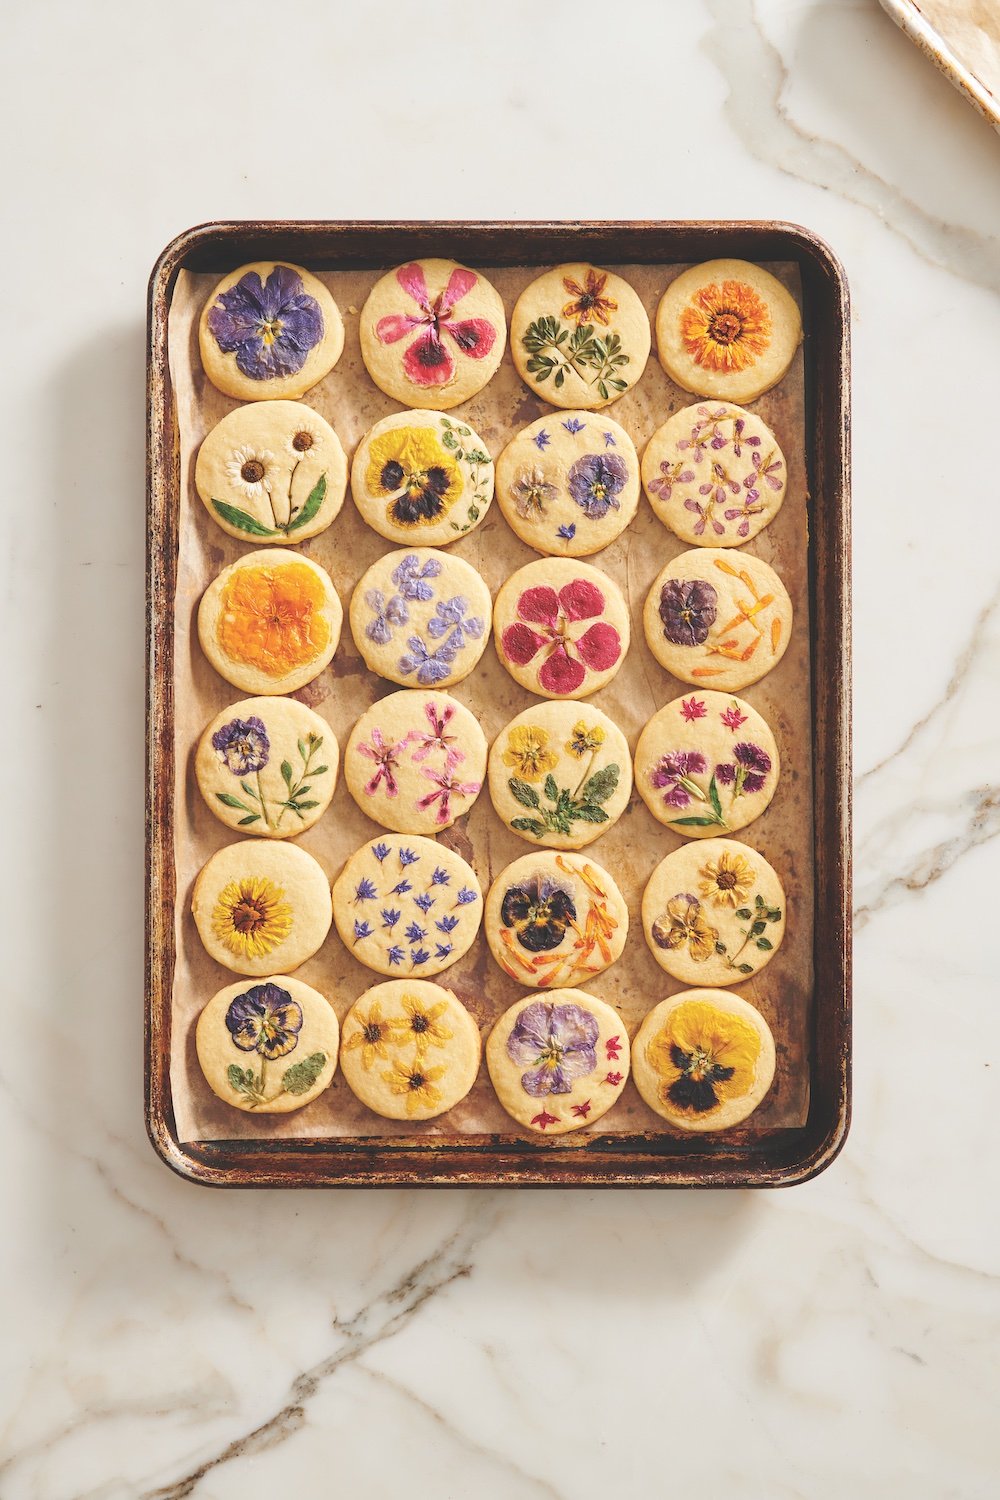 Spiced Shortbread Cookies: Almost Too Pretty to Eat